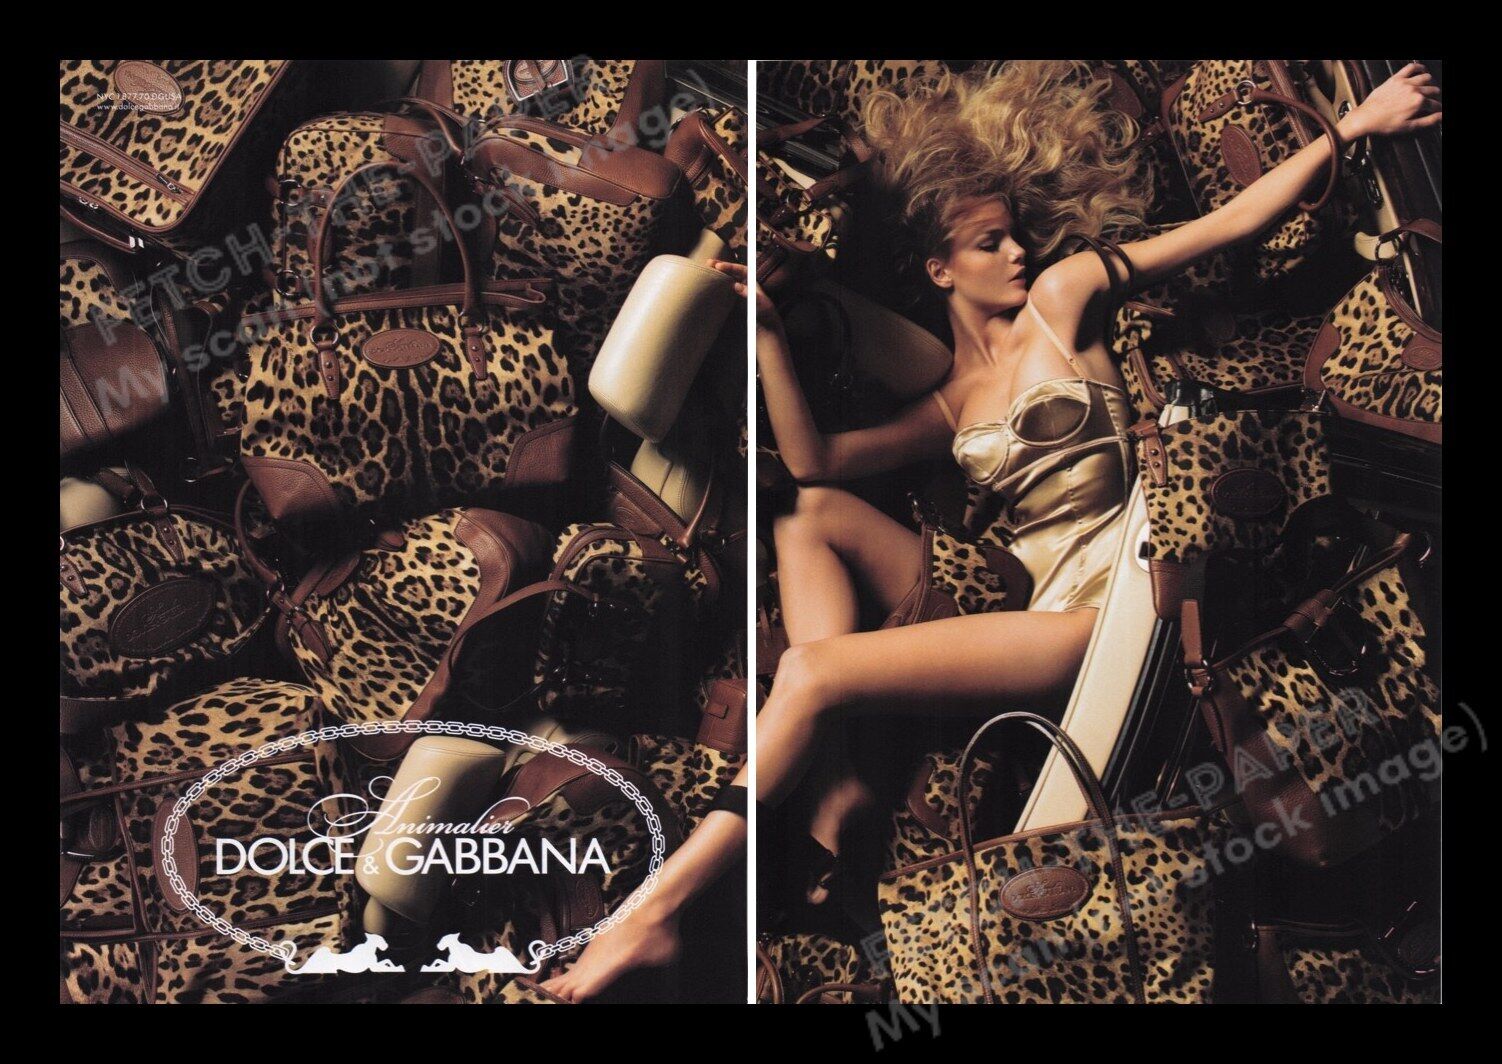 Dolce & Gabbana Animalier 2000s Print Advertisement (2 pages) 2007 Legs